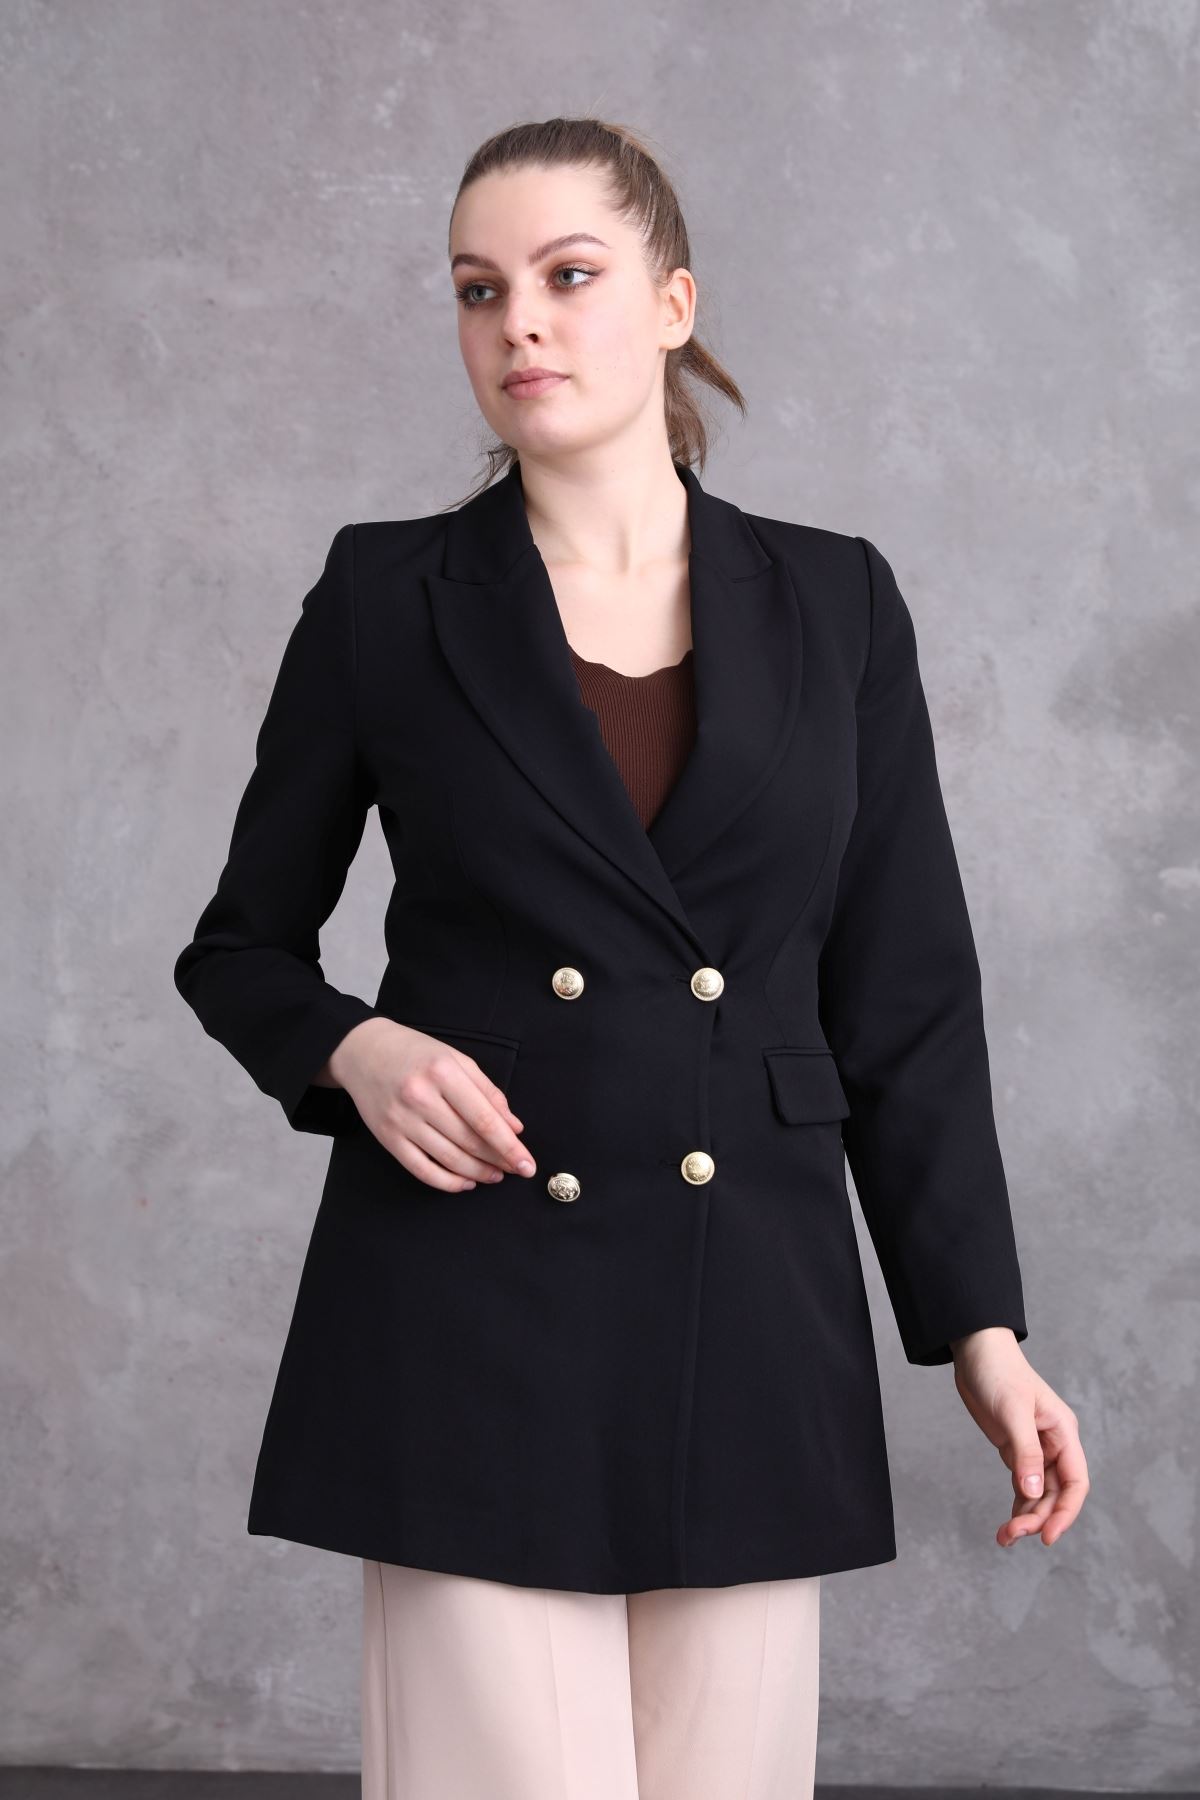 Women's Jacket with Pocket Flap Buttons